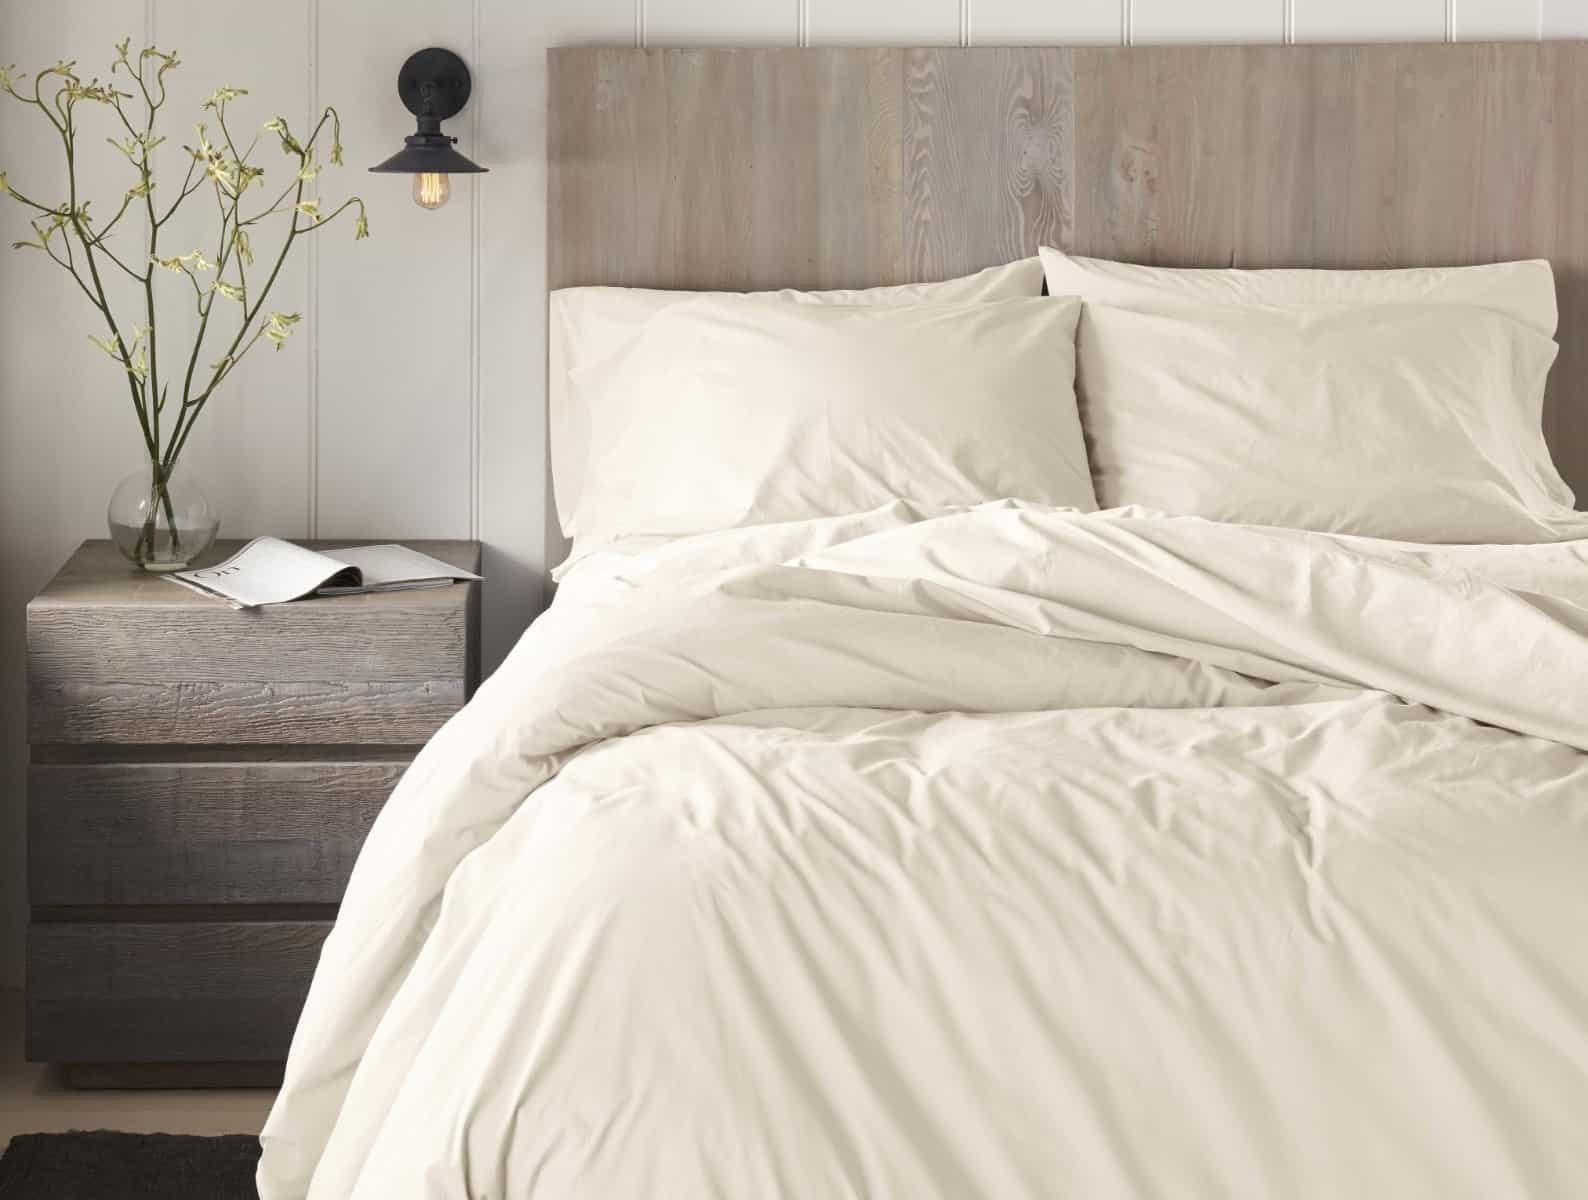 Go For Beige Sheets If You Want A Crisp Look